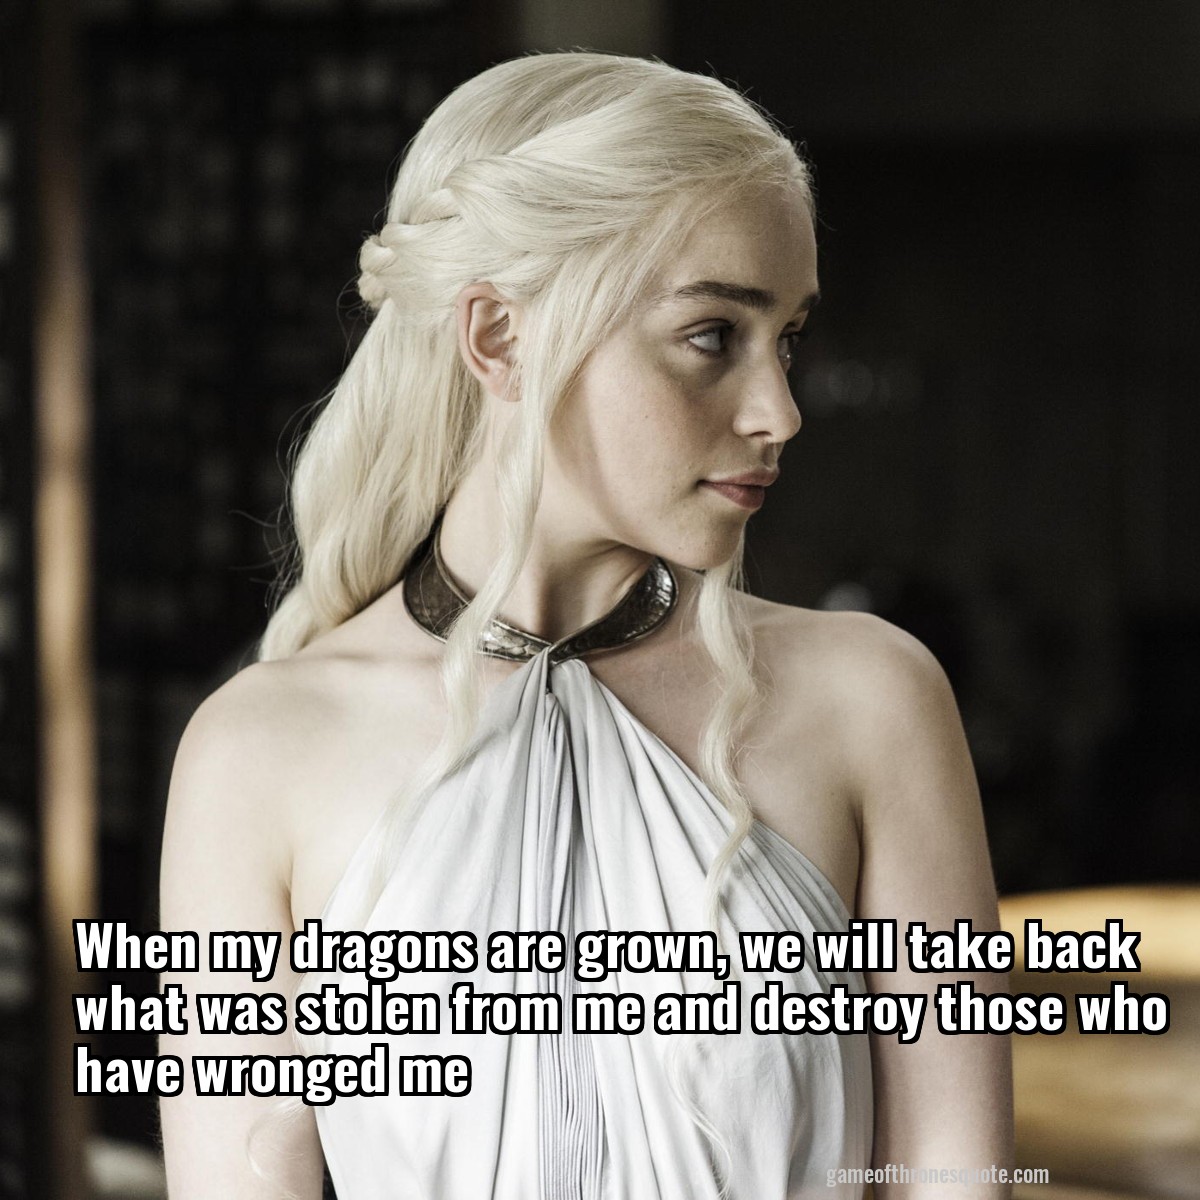 When my dragons are grown, we will take back what was stolen from me and destroy those who have wronged me